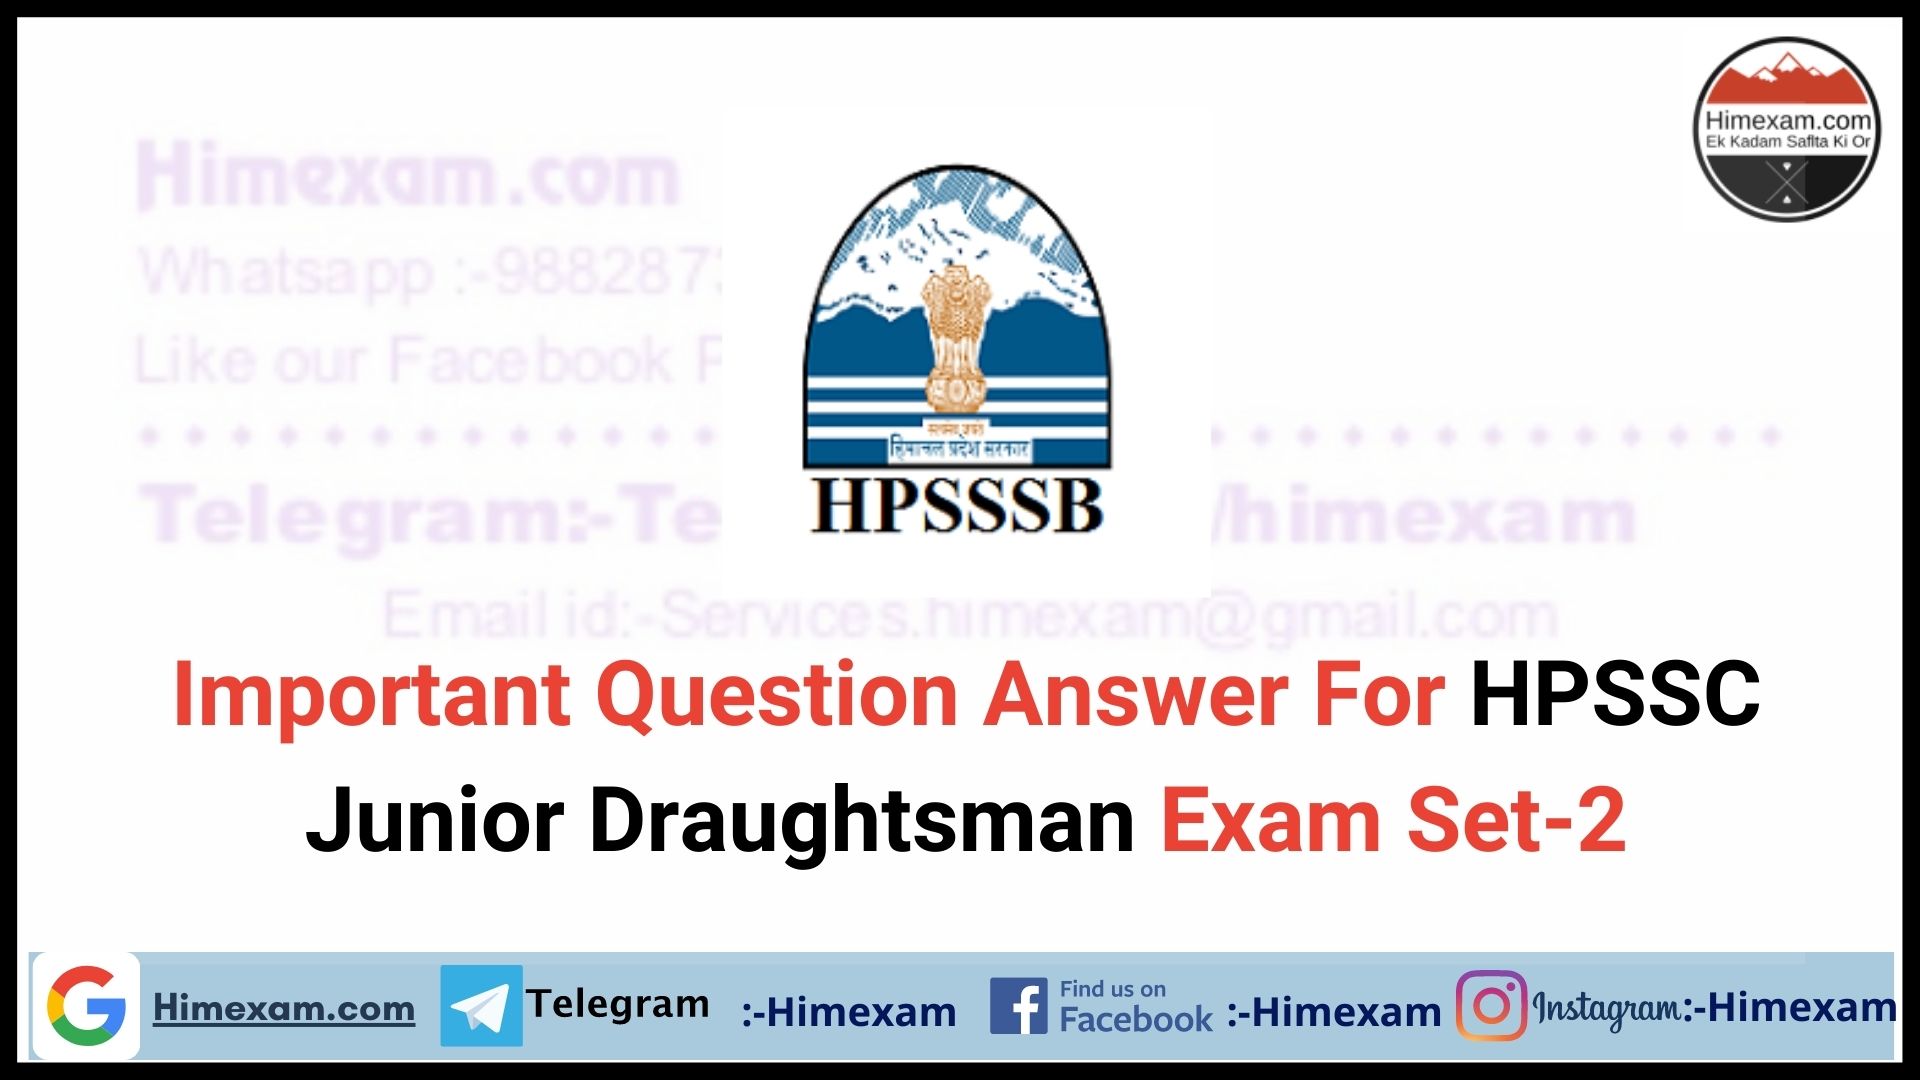 Important Question Answer For HPSSC Junior Draughtsman Exam Set-2